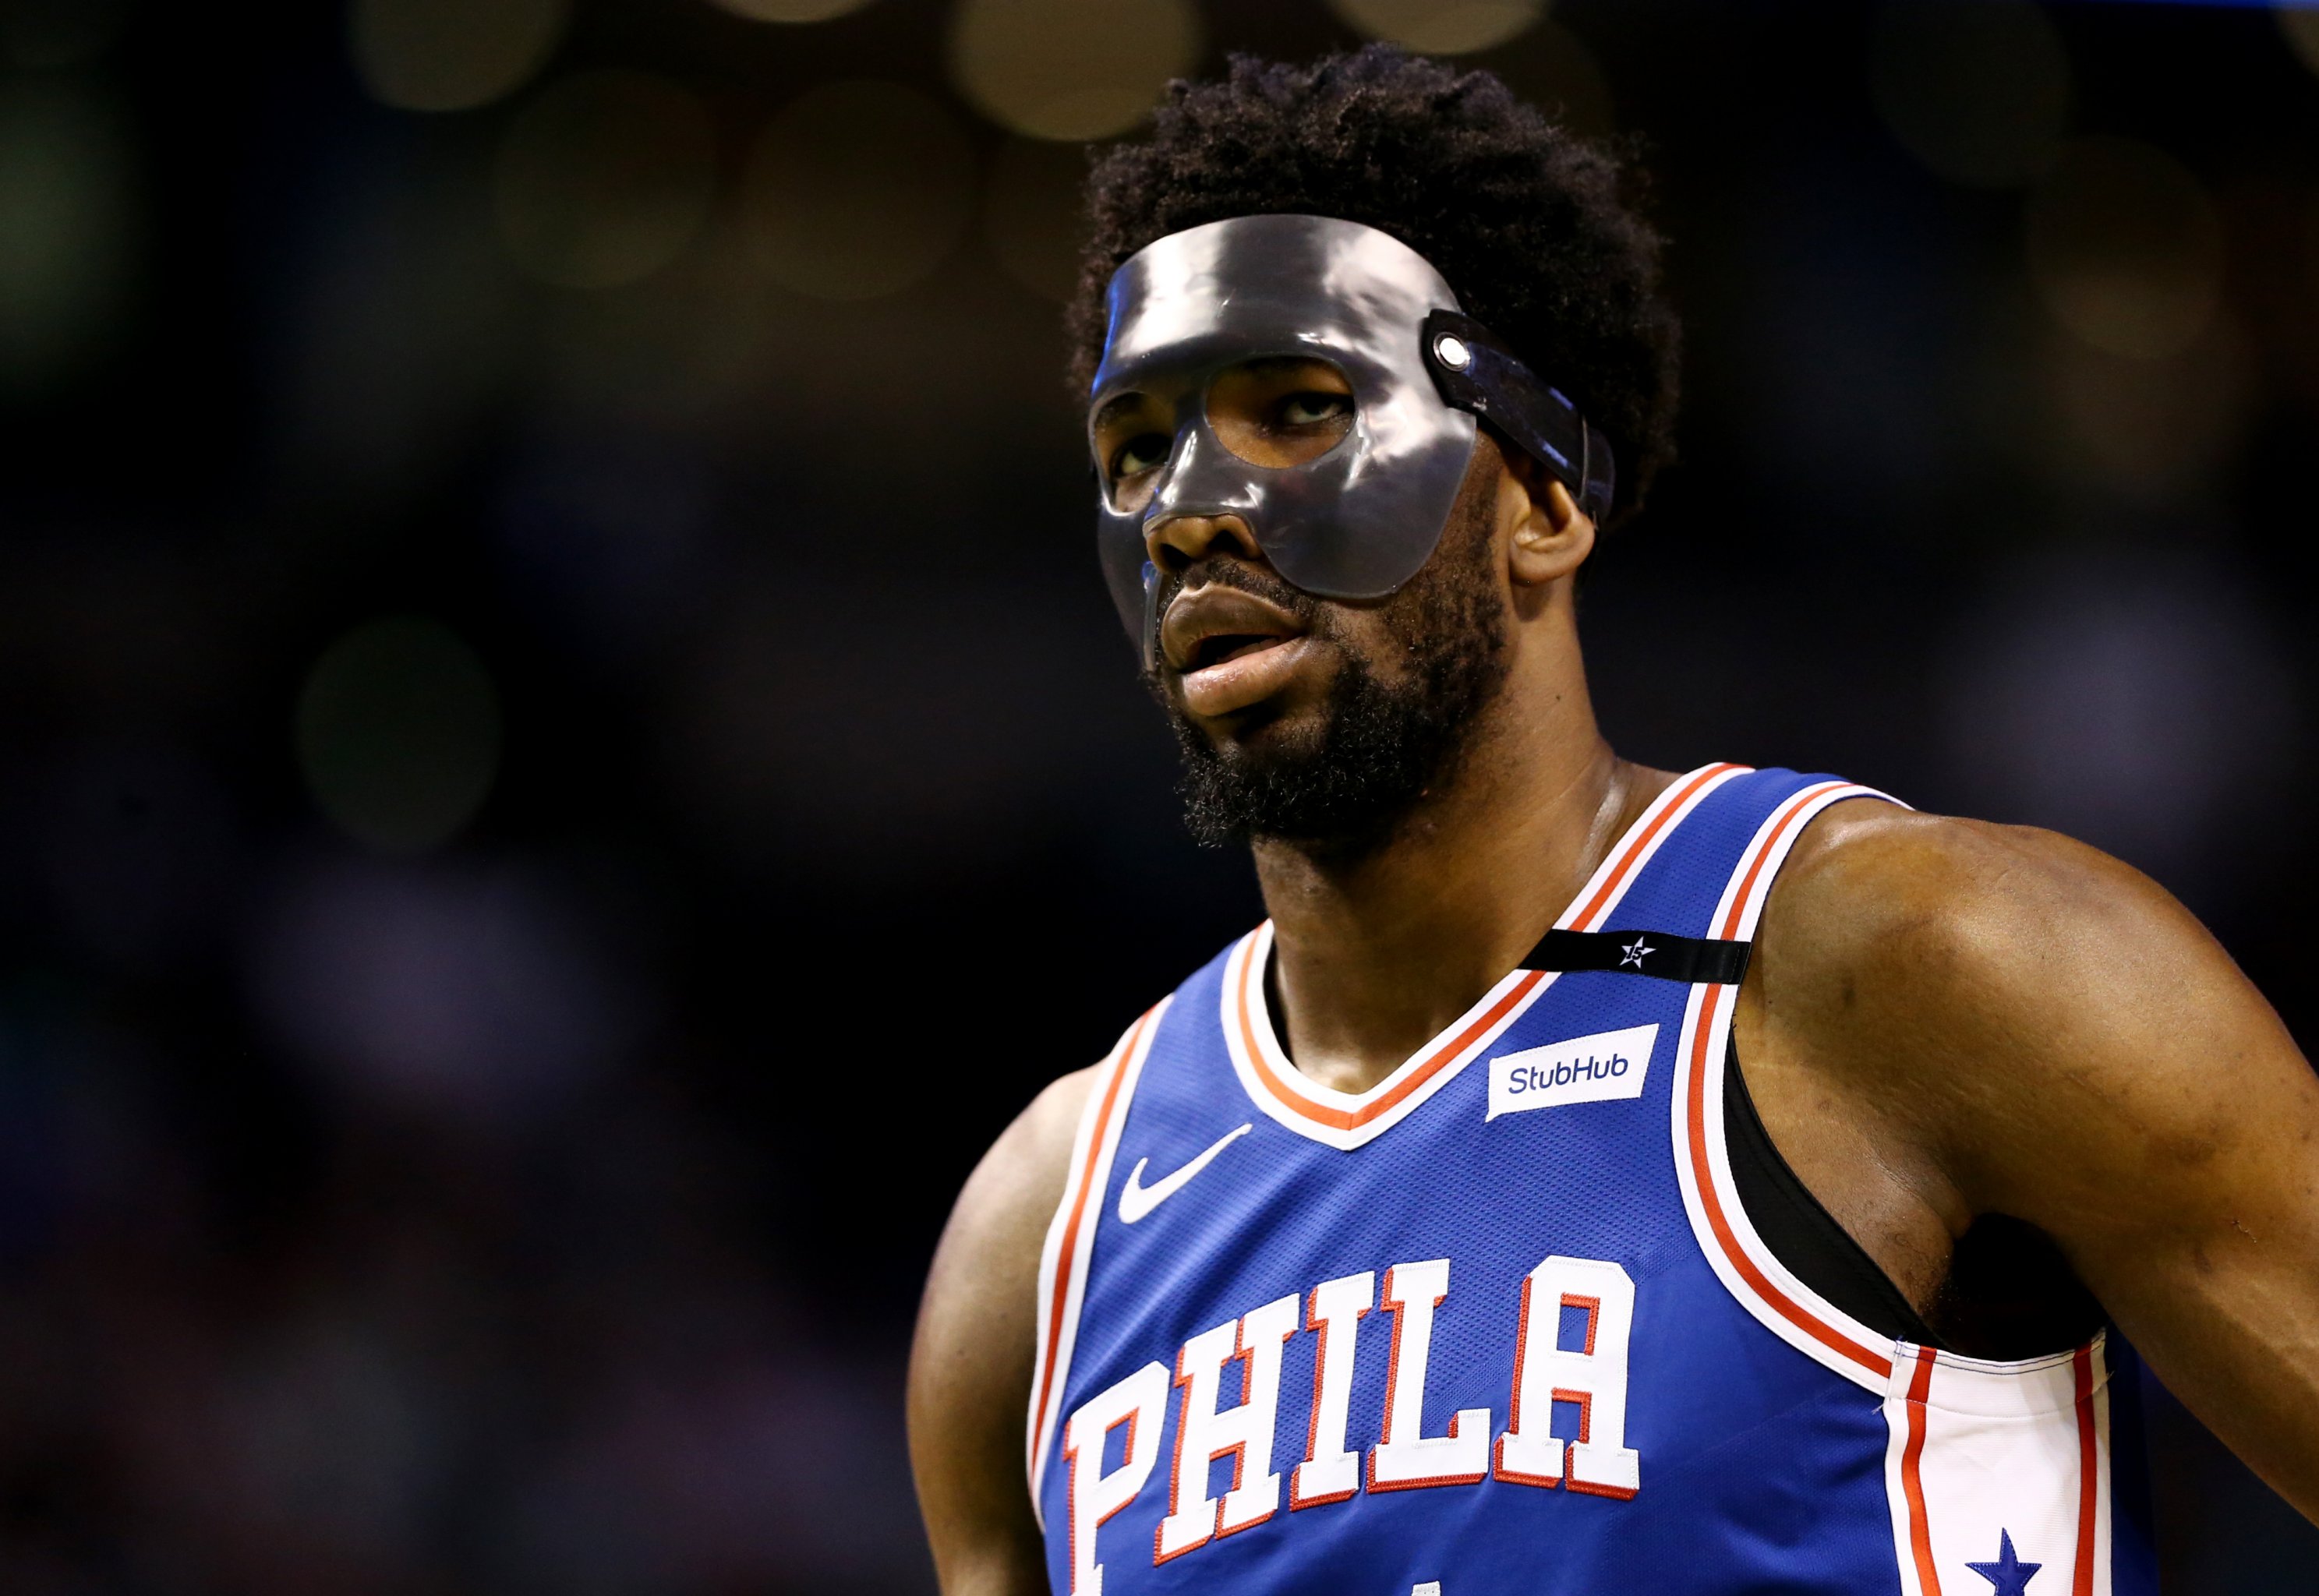 Joel Embiid won a playoff game in a face mask, almost 40 years after Dave  Parker wore one